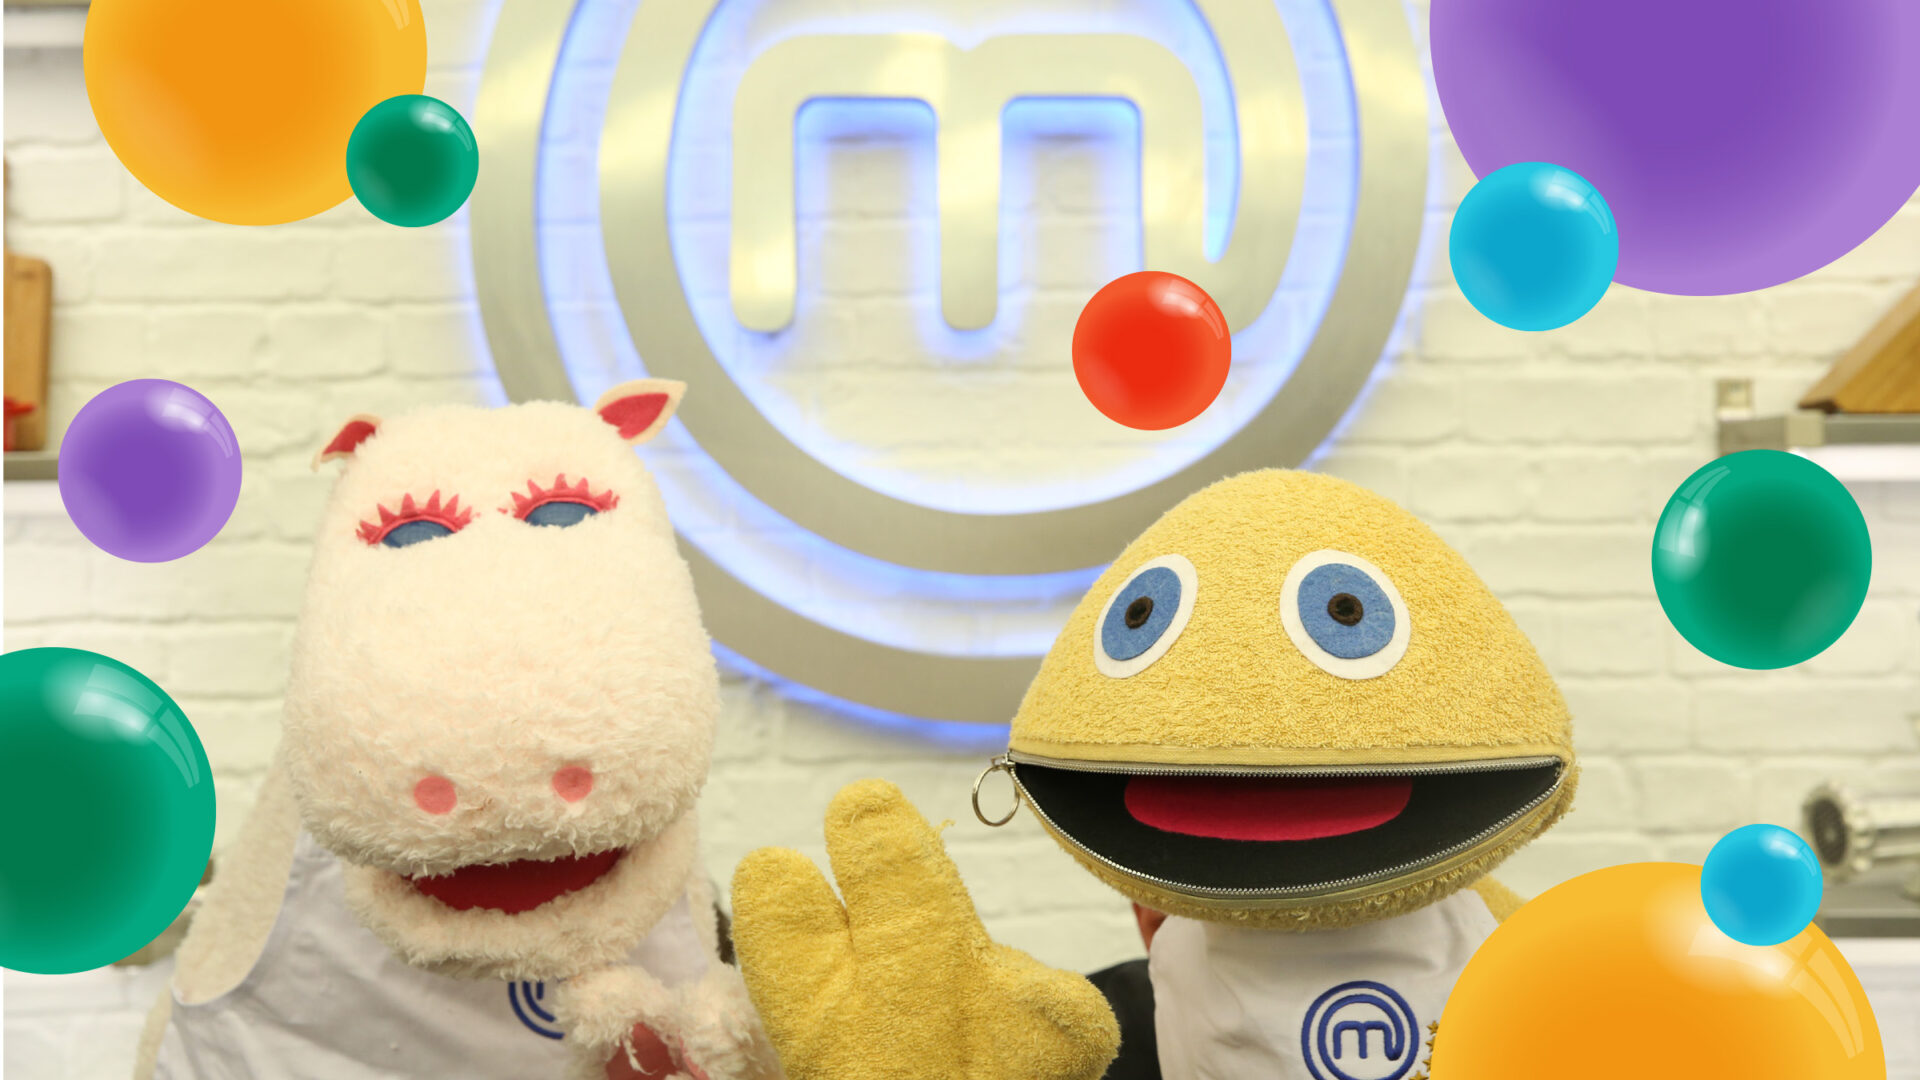 George and Zippy in front of the masterchef logo